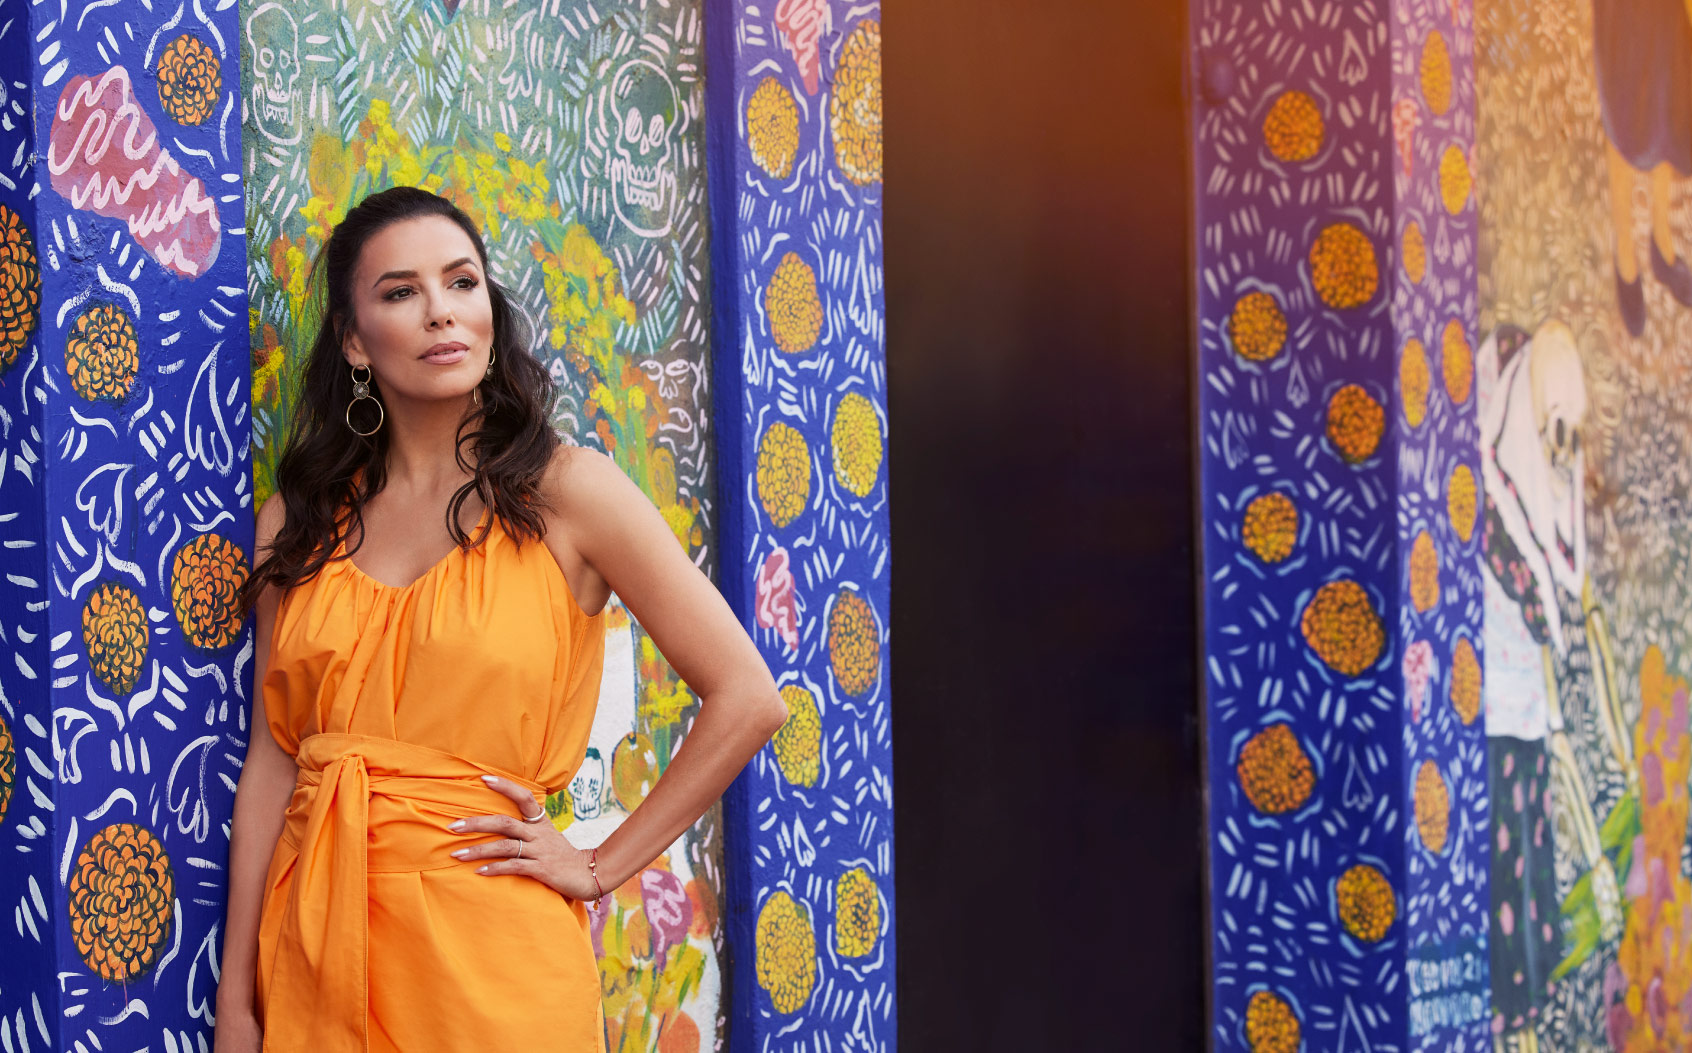 Eva Longoria is pictured in Mexico filming for Searching For Mexico, wearing an orange dress, with her hair a little over her shoulders, and she has her hand on her hip. The background is a painted floral wall against a cobalt blue background. The flowers are marigolds painted in a pattern, with skulls scattered on the wall.